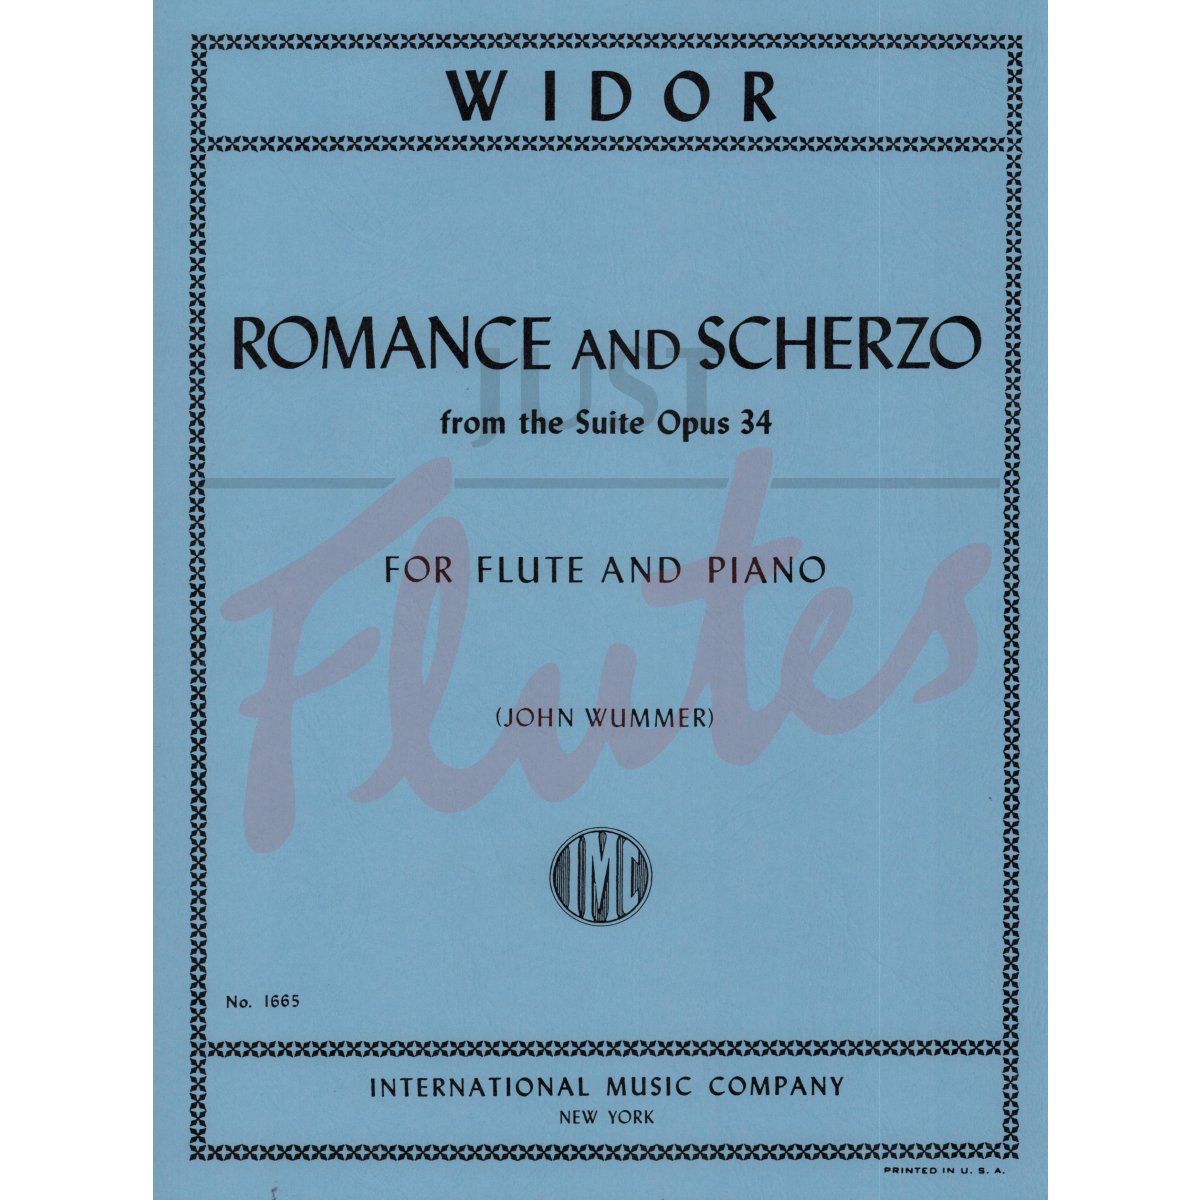 Romance and Scherzo from the Suite Op. 34 for Flute and Piano